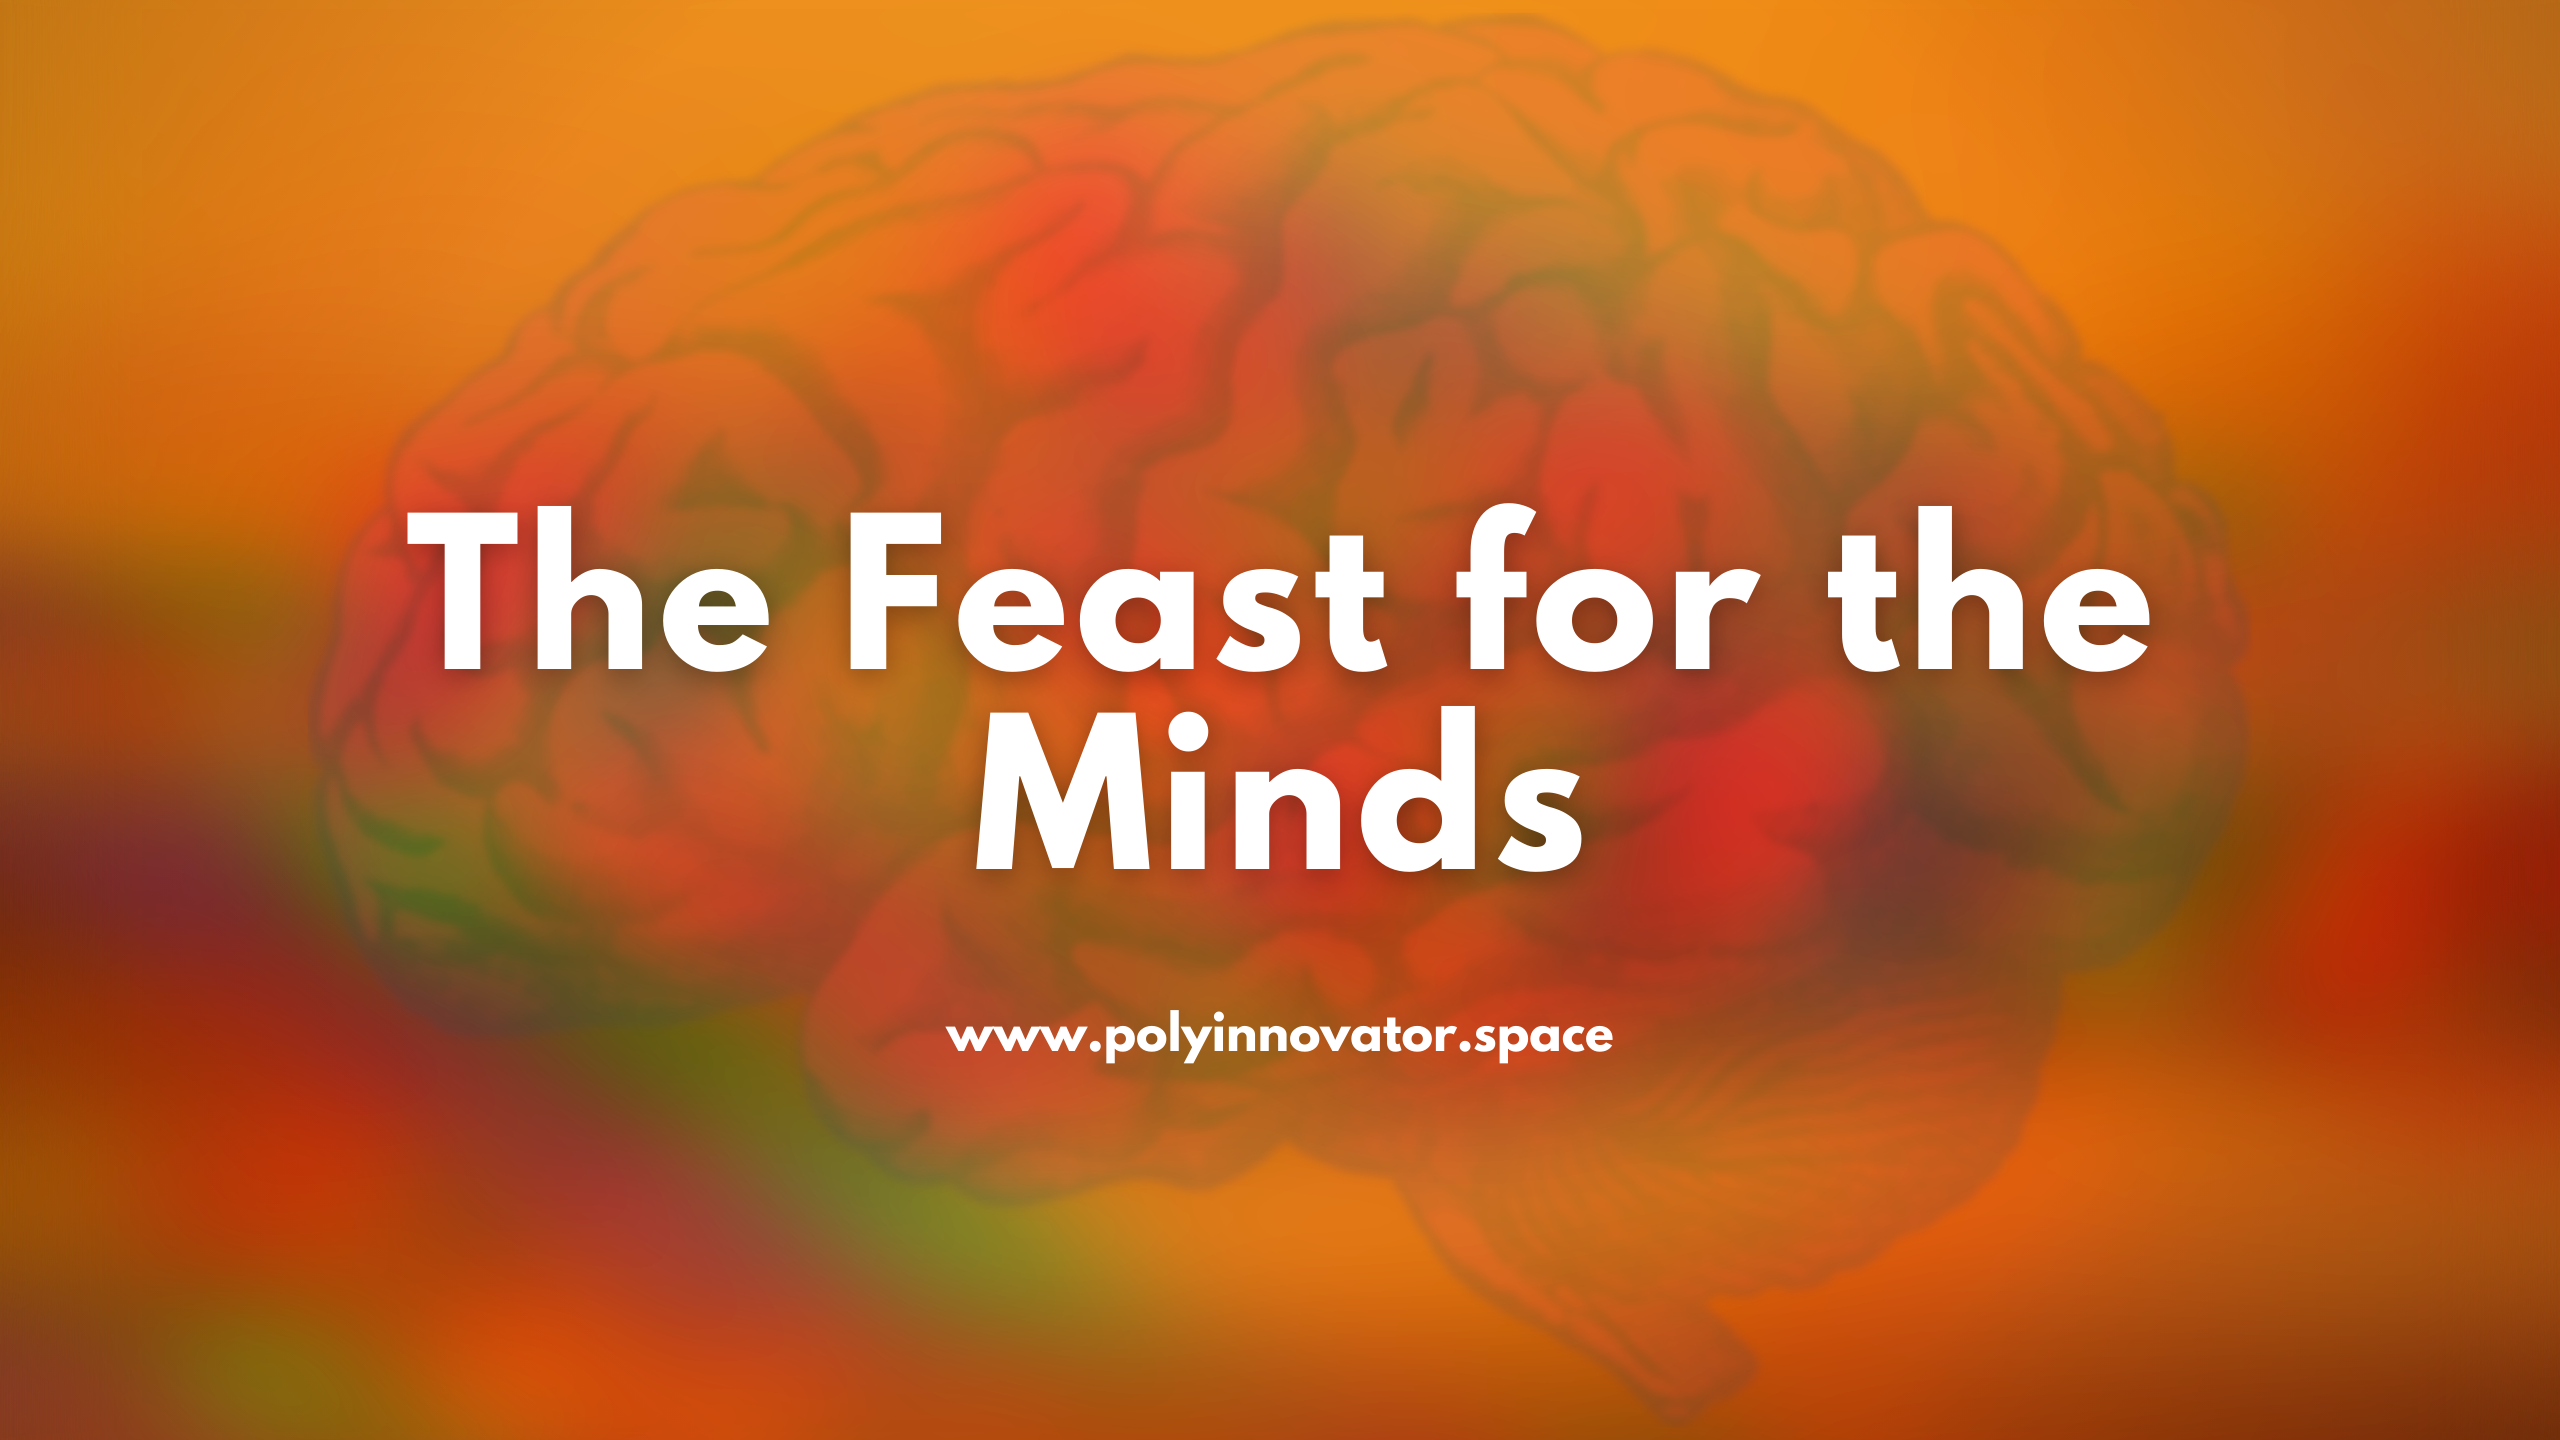 The Feast for the Minds